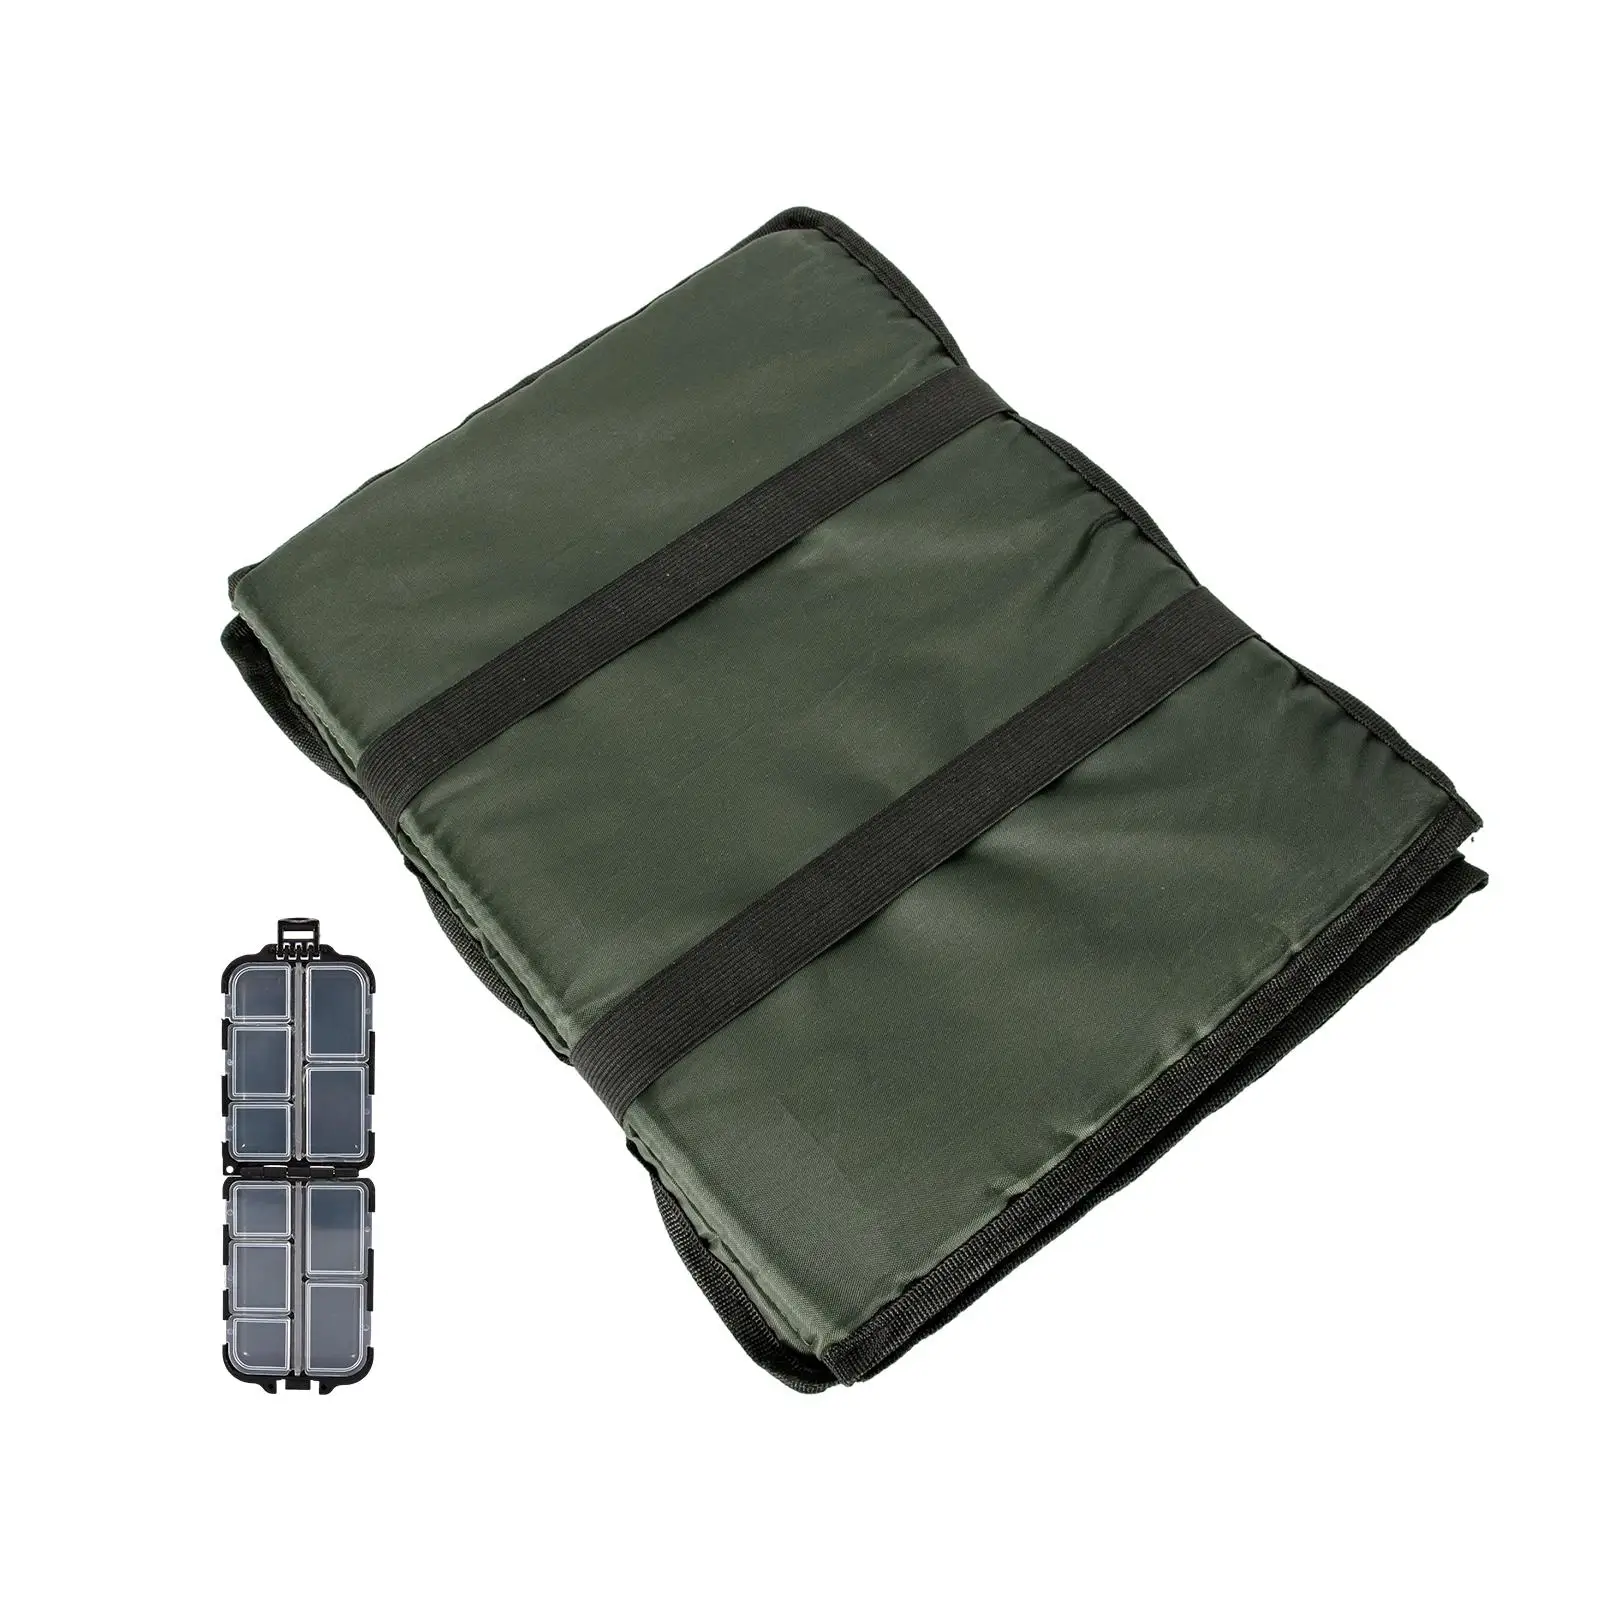 Portable Foldable Carp Fishing Release Mat with Small Lure Box Size 30x38x7cm with Elasticated Transport Straps Accessory